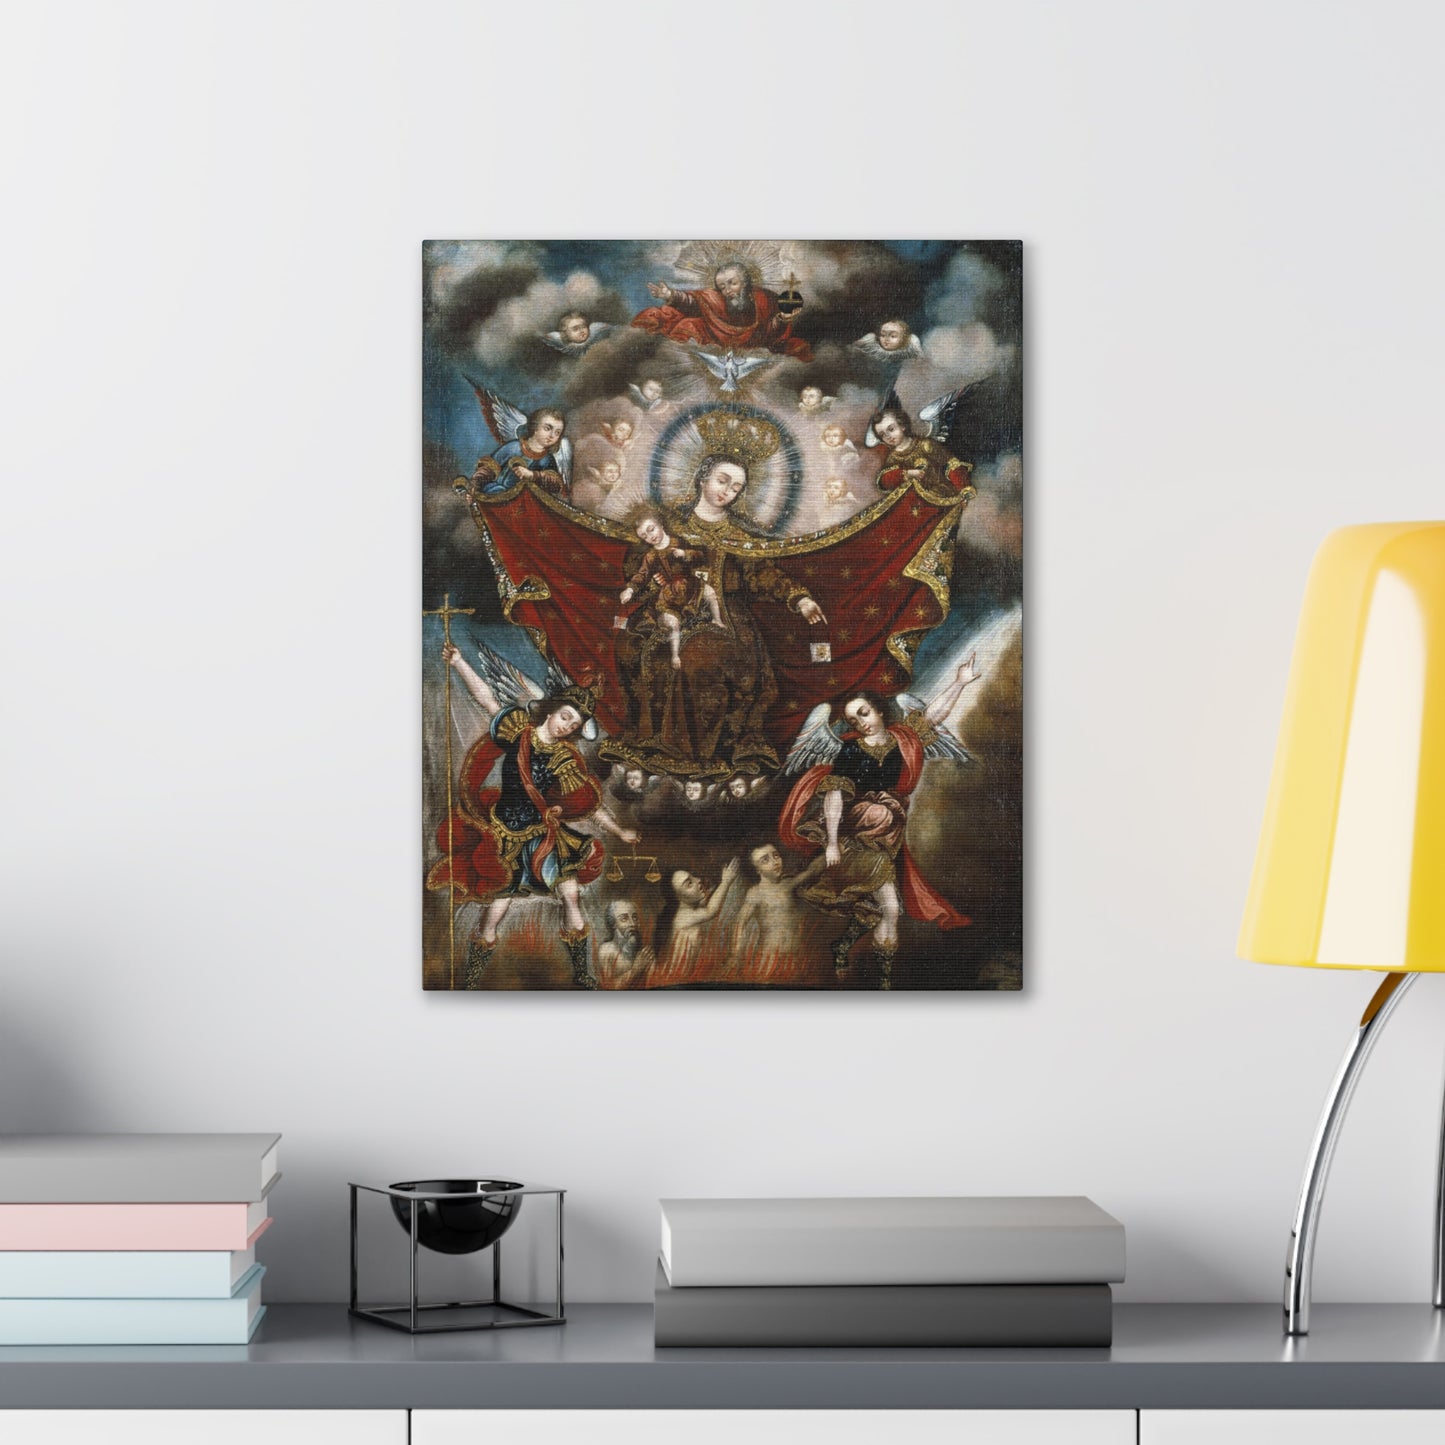 Our Lady of Carmel and Holy Souls in Purgatory Catholic Canvas Print, Religious Home Decor, All Souls Day Decoration